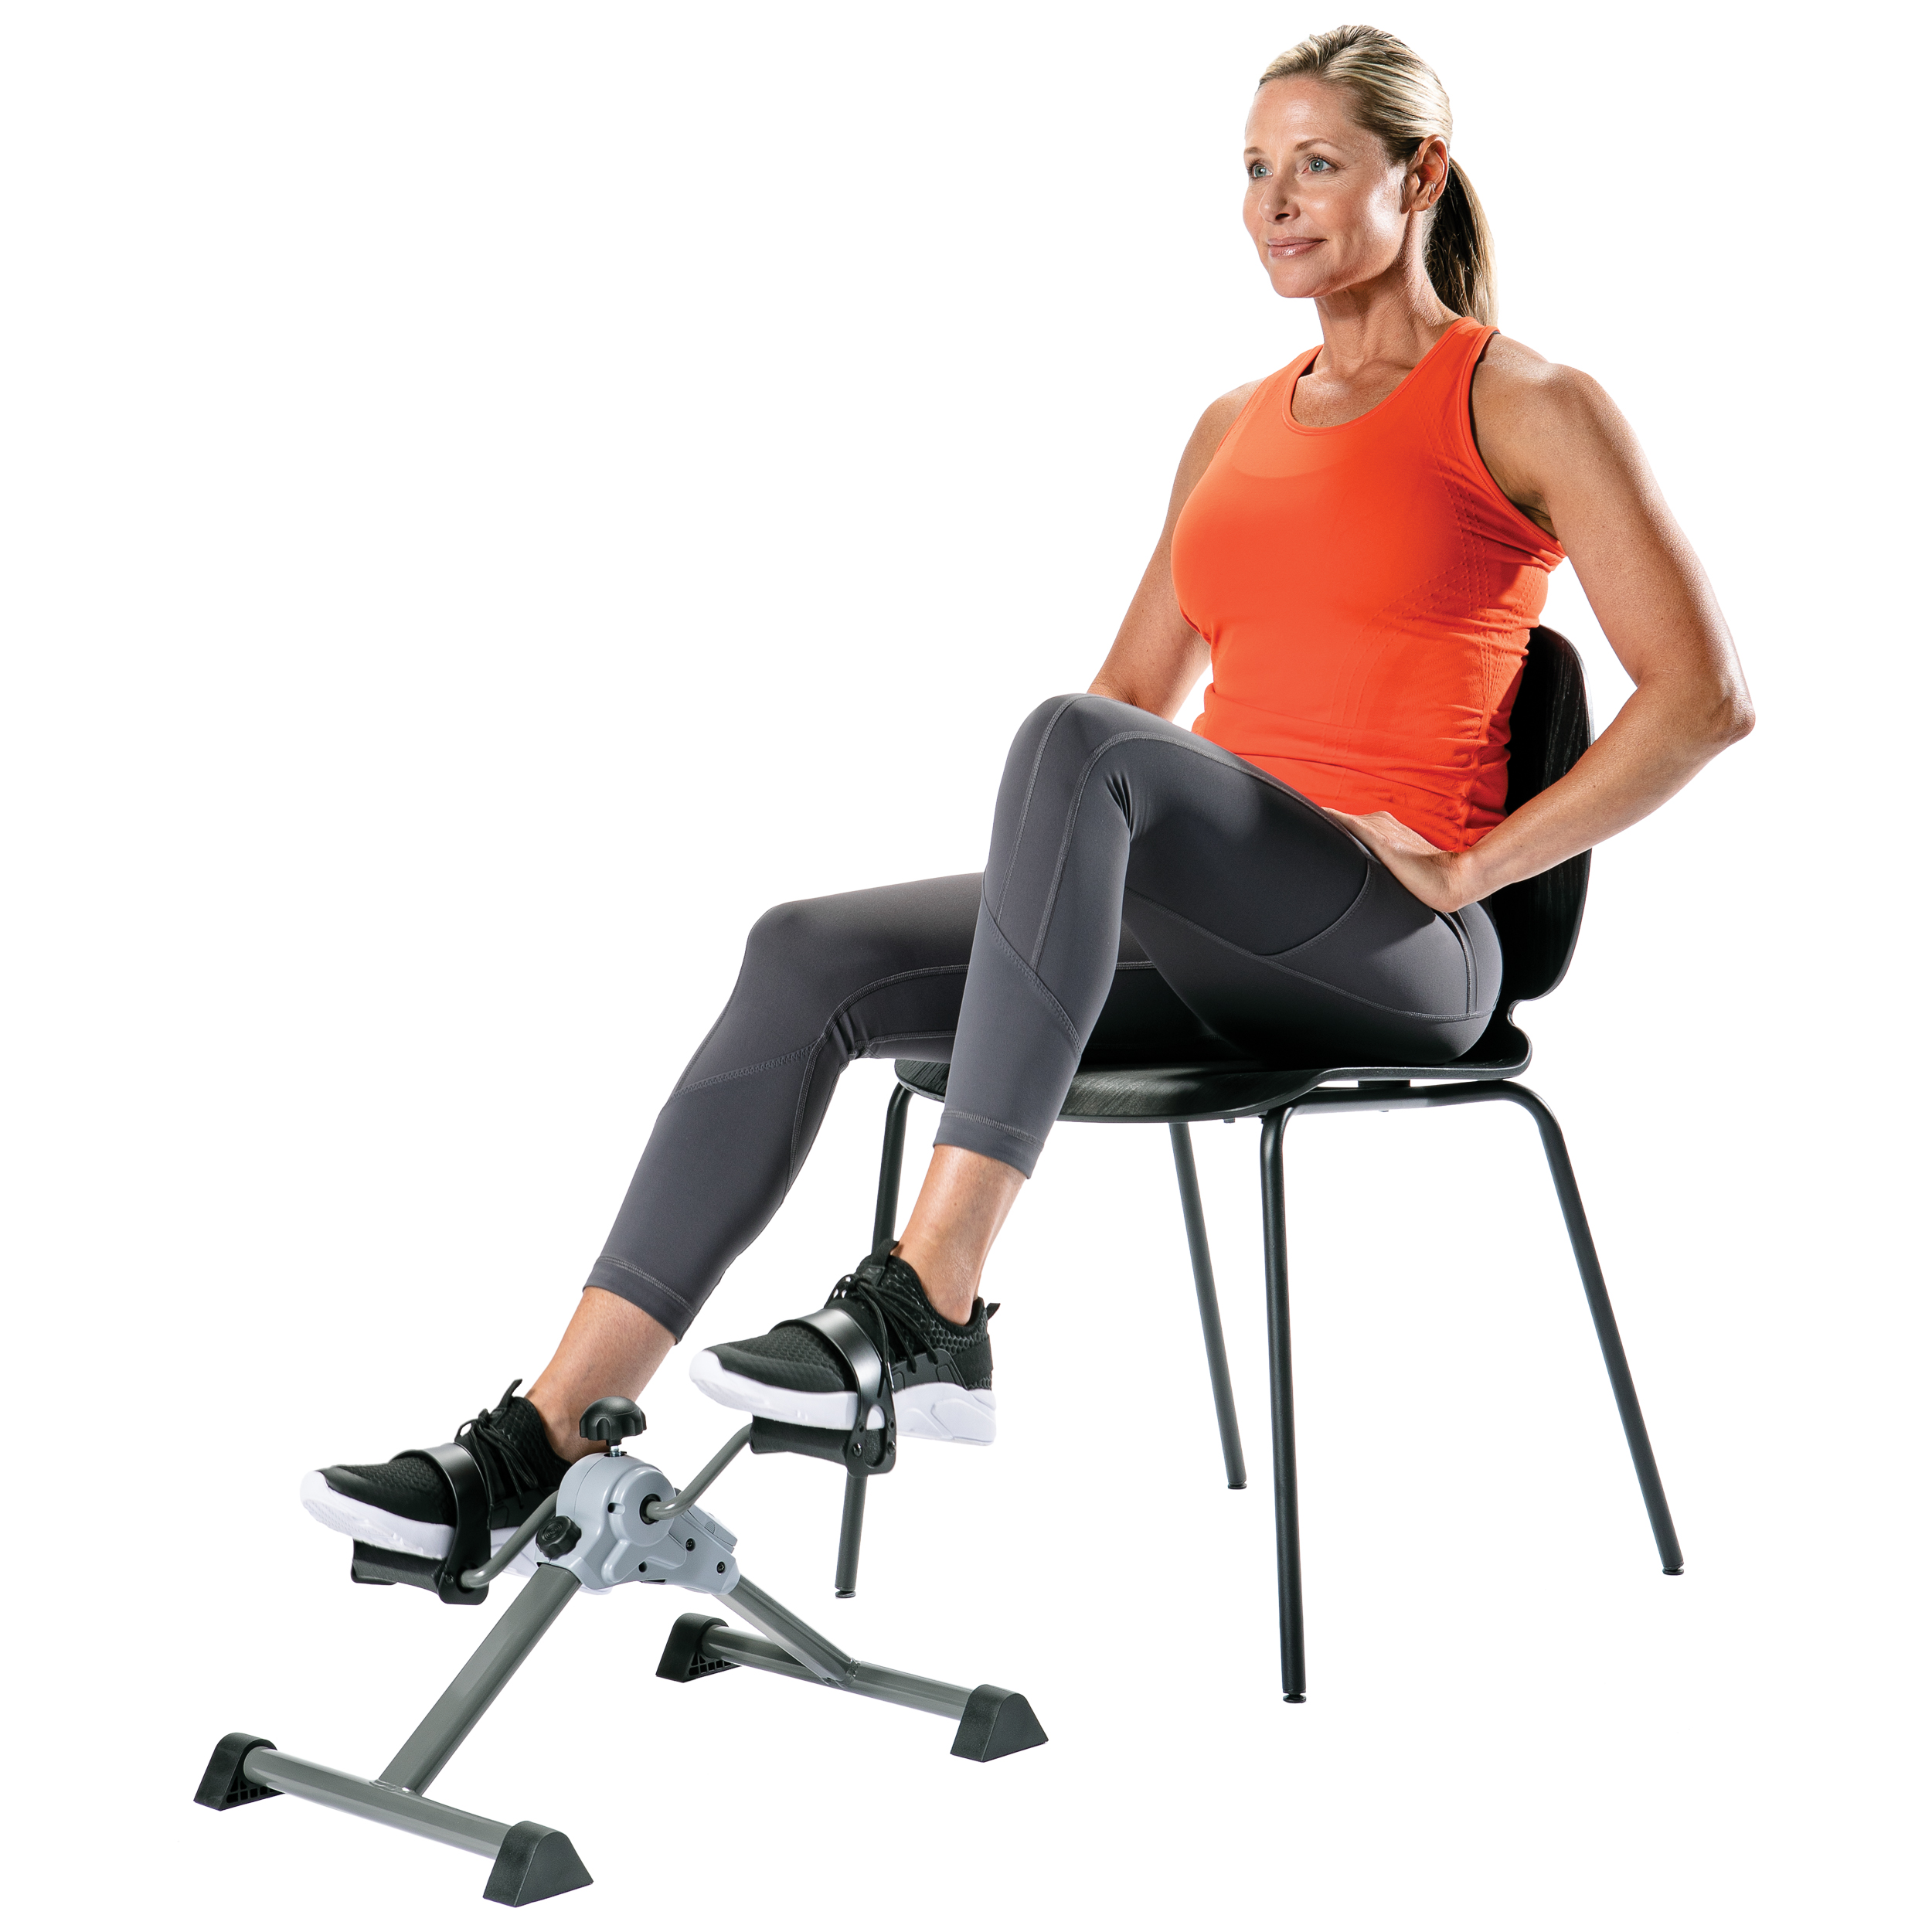 New Details about   New Stamina Folding Upper & Lower Body Cycle with Monitor & boost mobility 